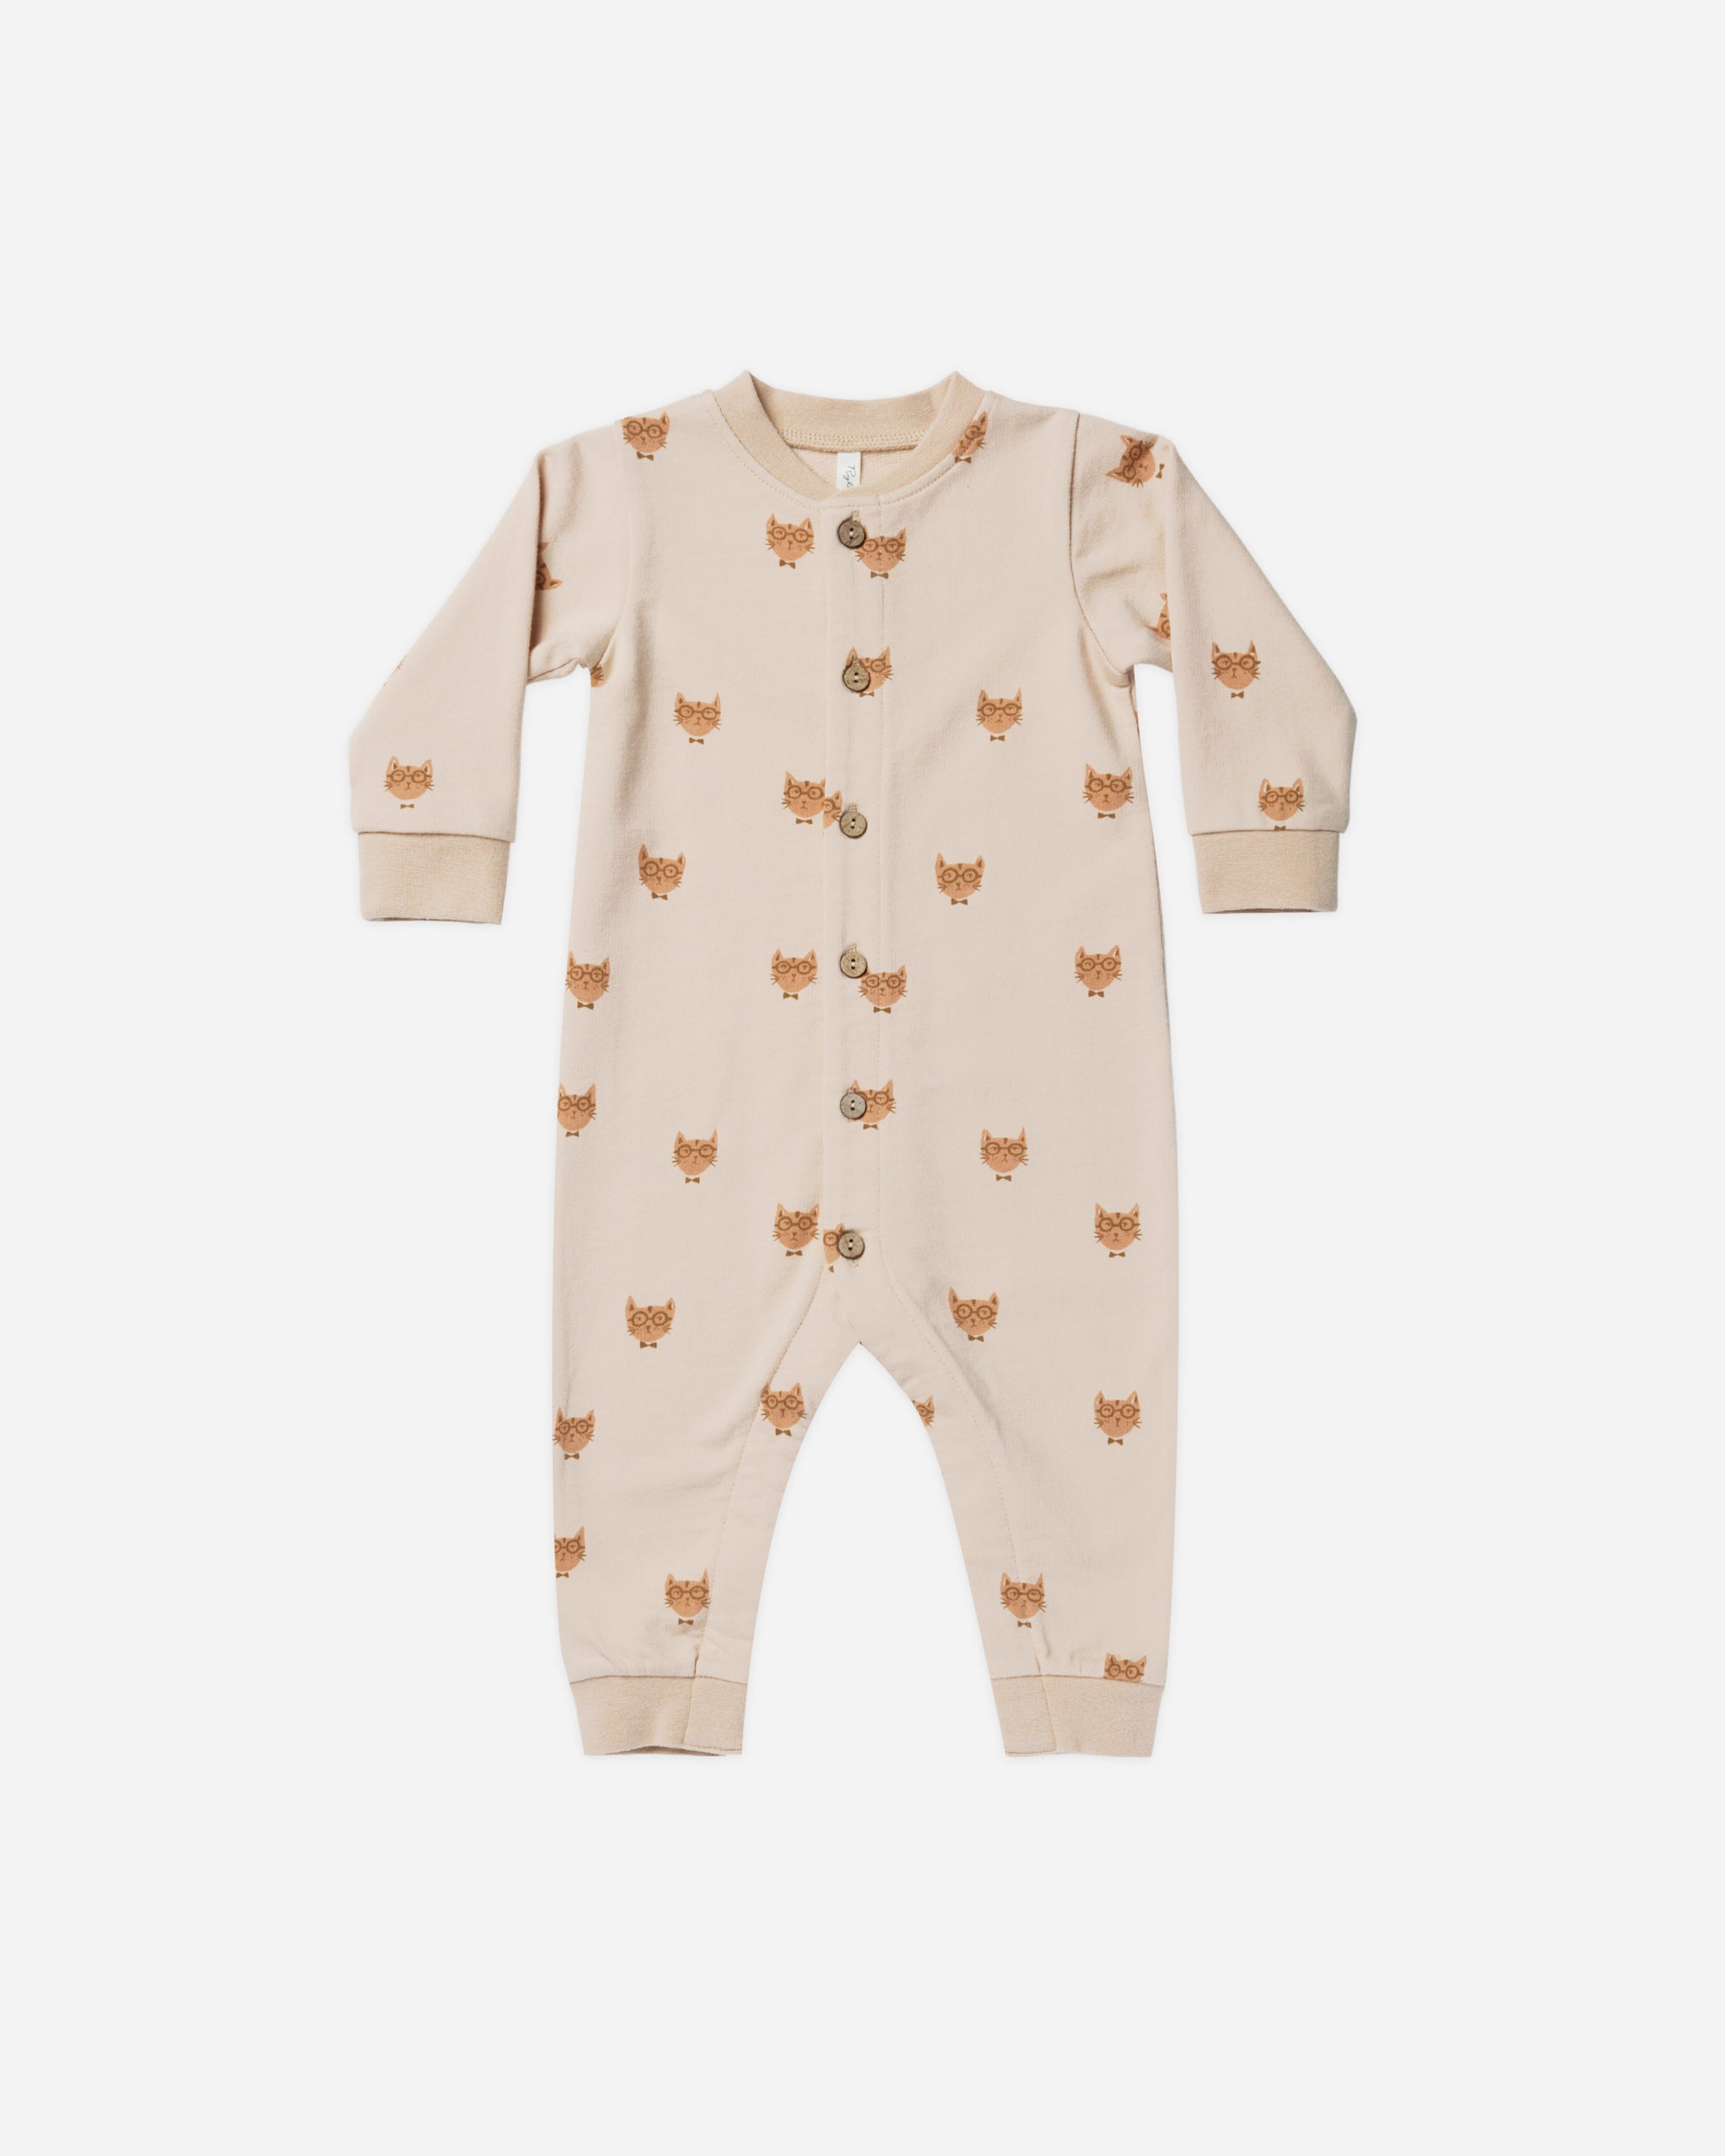 Button Jumpsuit || Cool Cat - Rylee + Cru | Kids Clothes | Trendy Baby Clothes | Modern Infant Outfits |